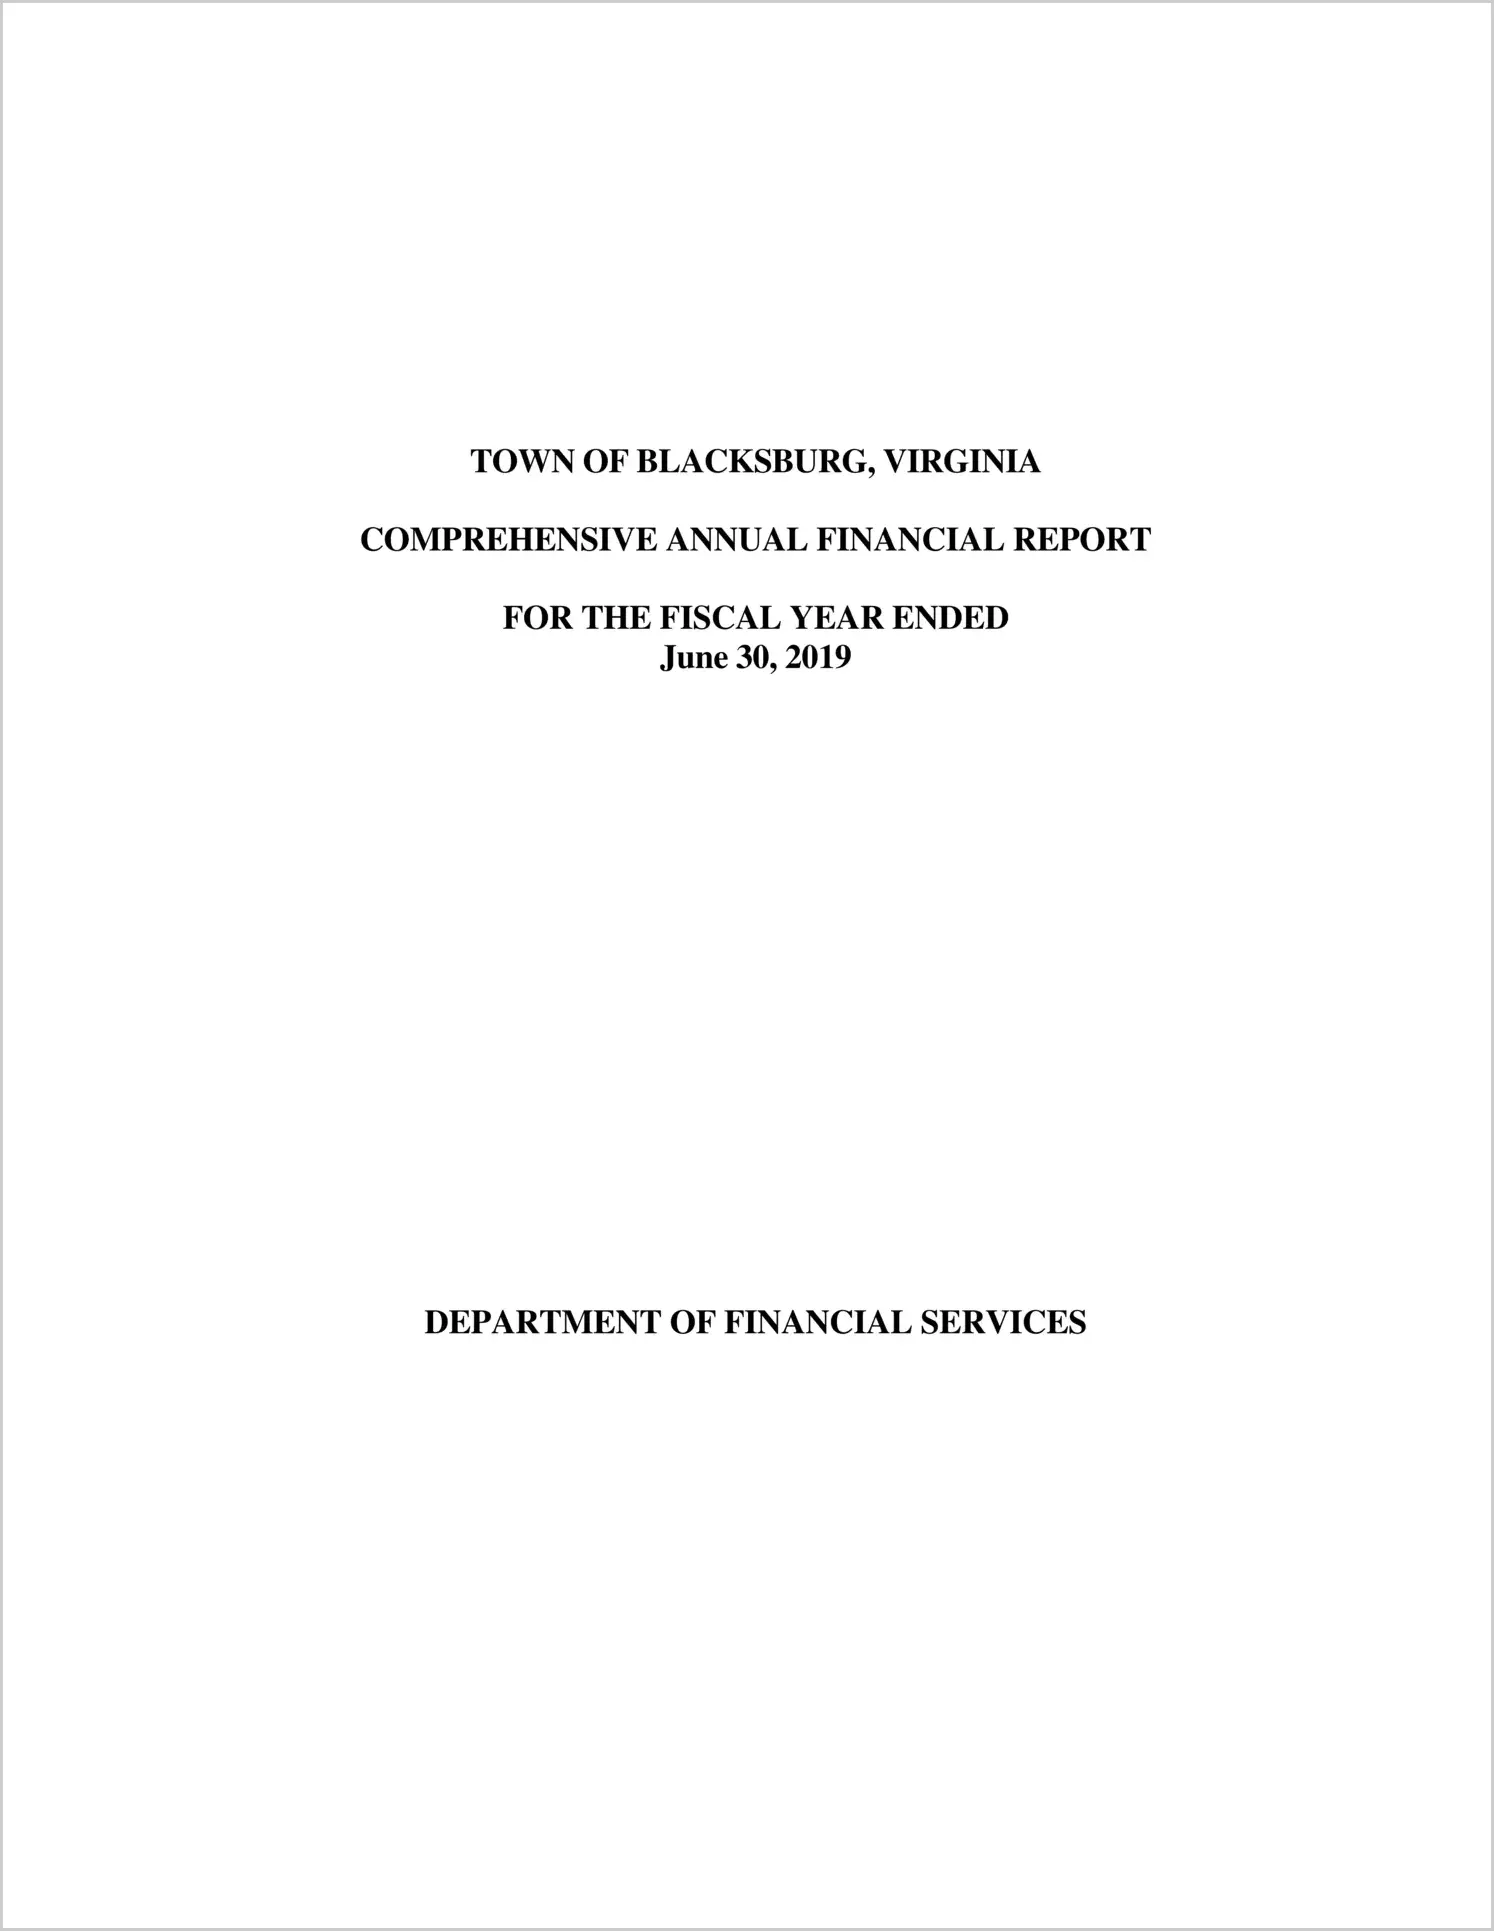 2019 Annual Financial Report for Town of Blacksburg